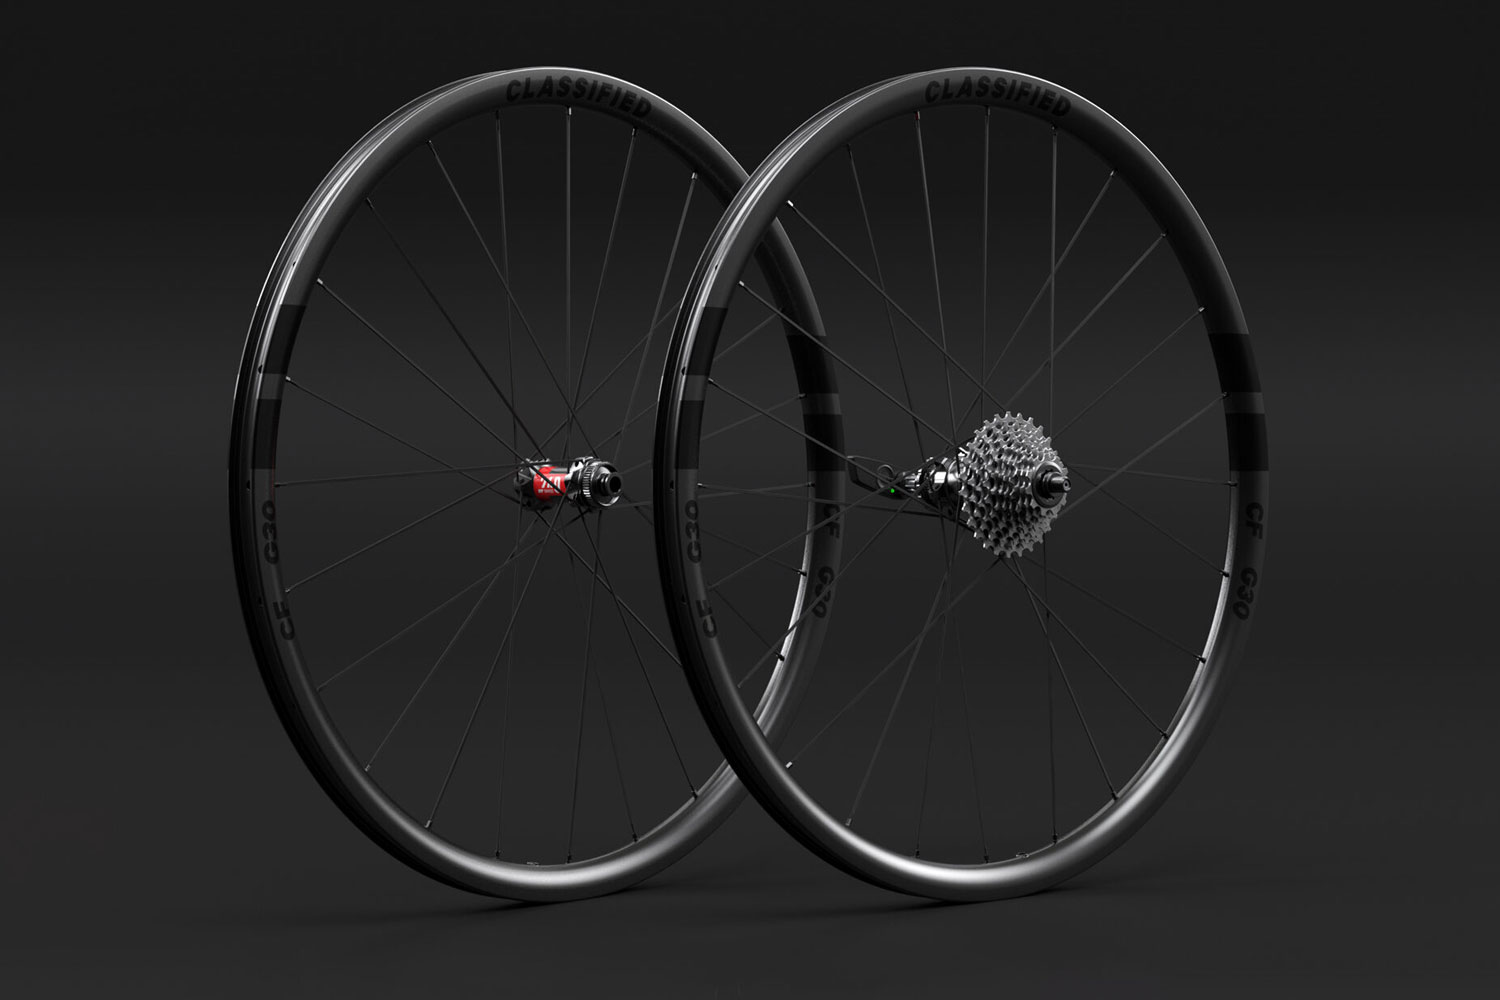 Classified Carbon Wheelsets, gravel & all-road wheels with wireless 2x internal gear hub built-in, 30mm gravel